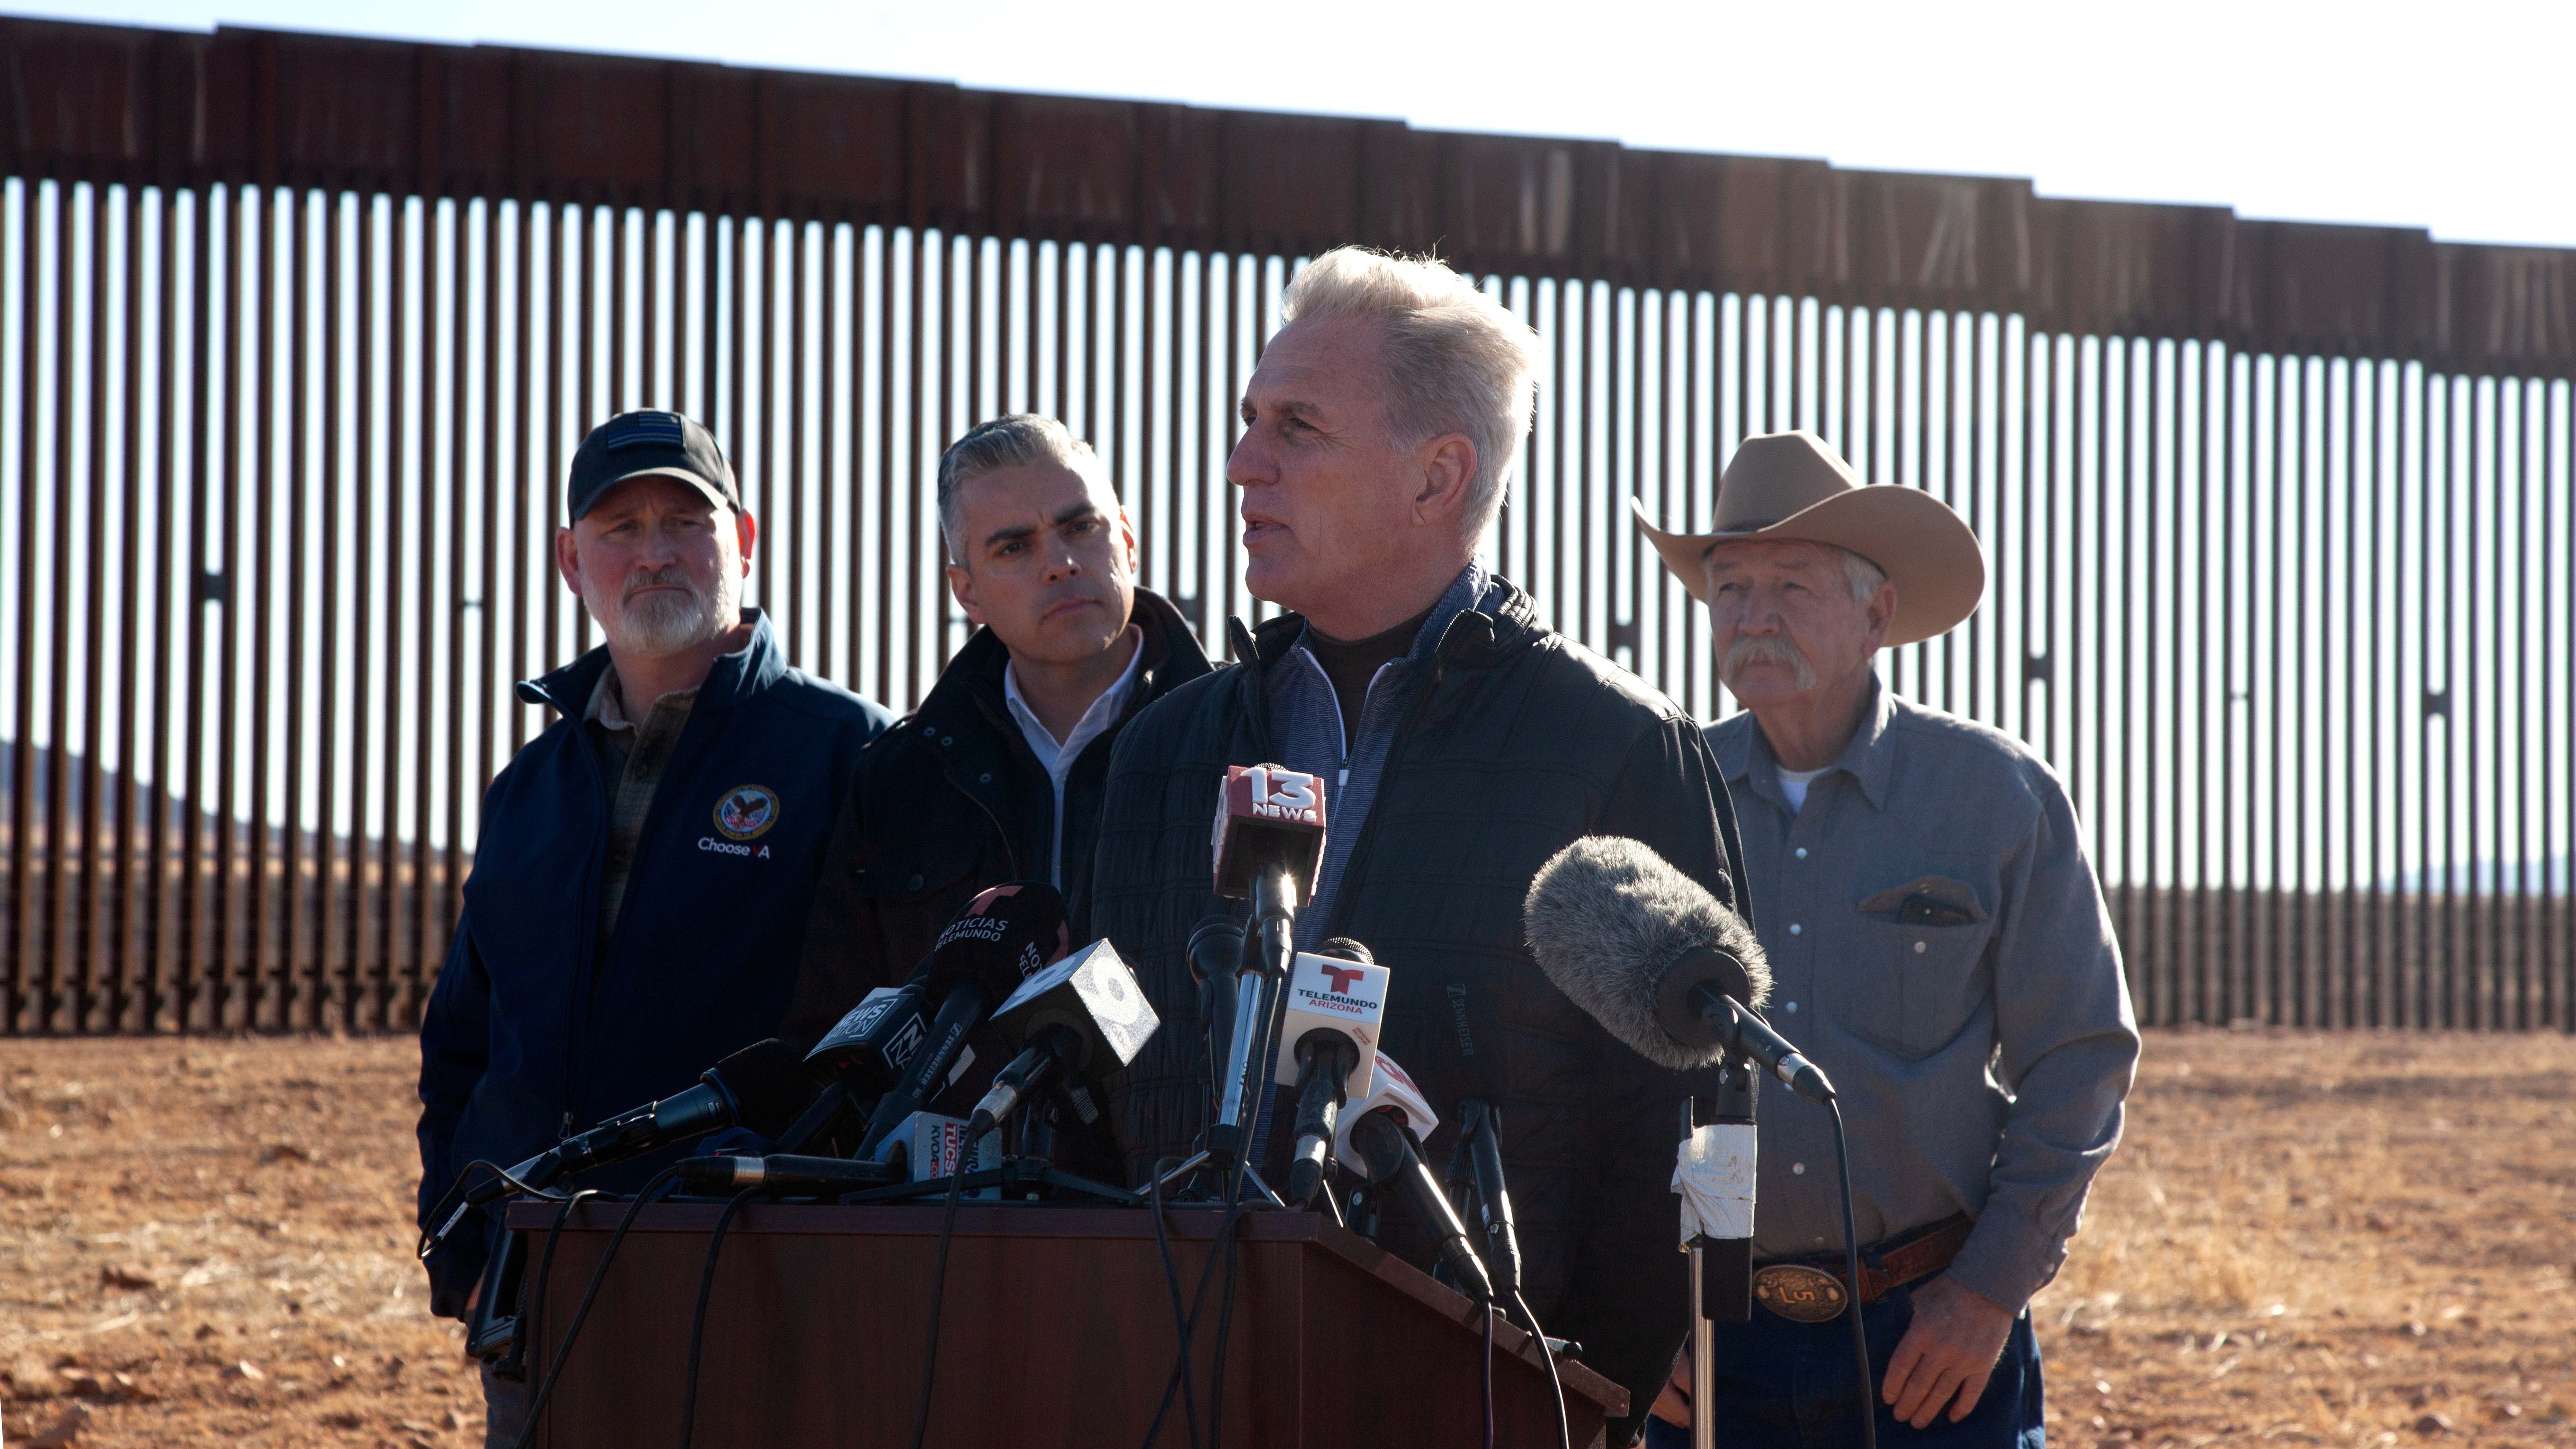 Republican U.S. House Speaker Kevin McCarthy visited Southern Arizona on Thursday, Feb. 16, 2023. McCarthy was joined along with four freshmen representatives, including Arizona's Juan Ciscomani. The trip gained pushback from Democrats who called it a "photo opportunity."